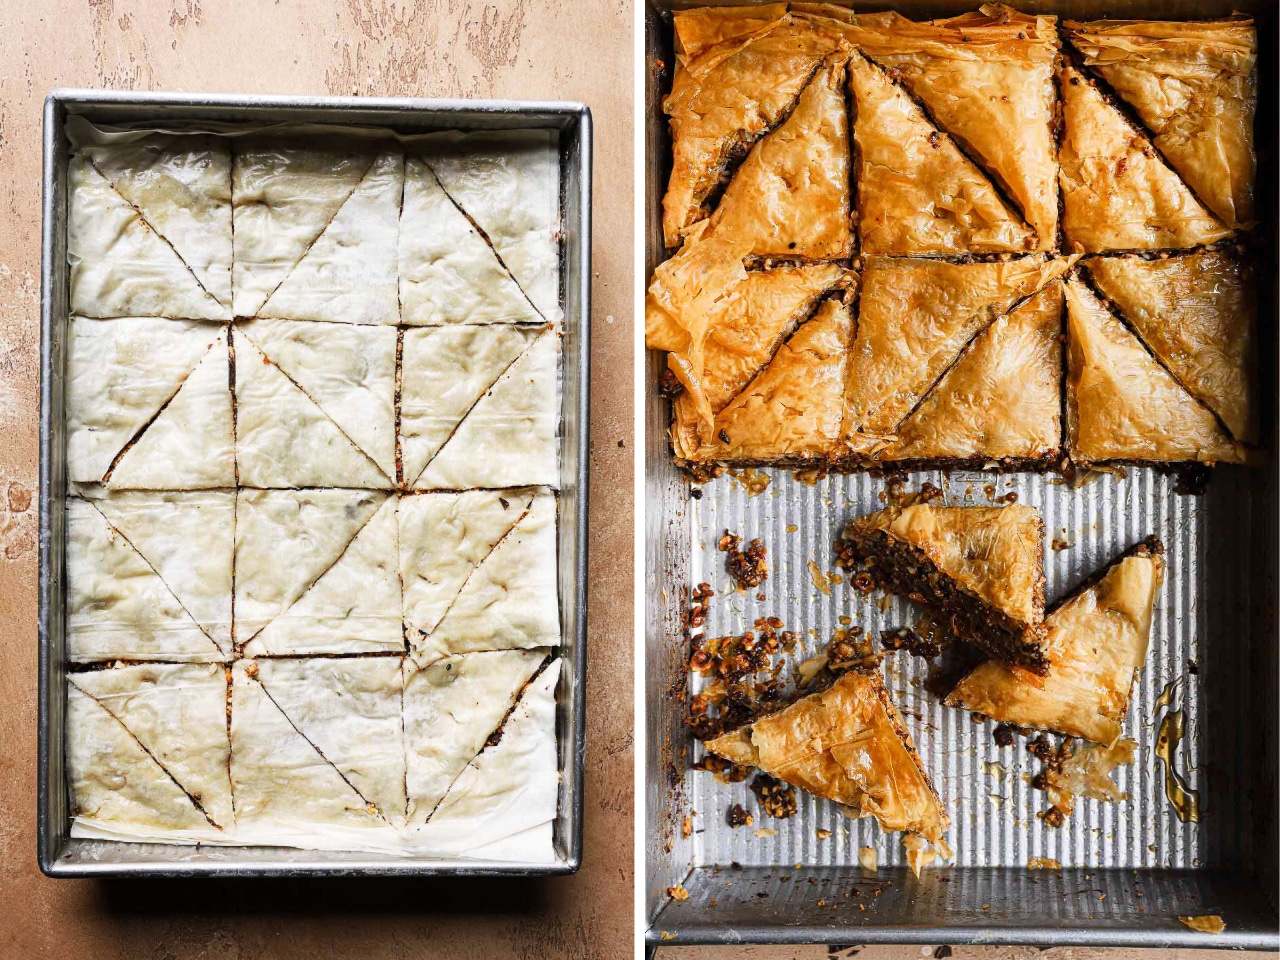 On the left is an image of homemade baklava before baking; it is precut before baking. On the right is an image of baked baklava, with crispy golden filo and chocolate, nutty filling.